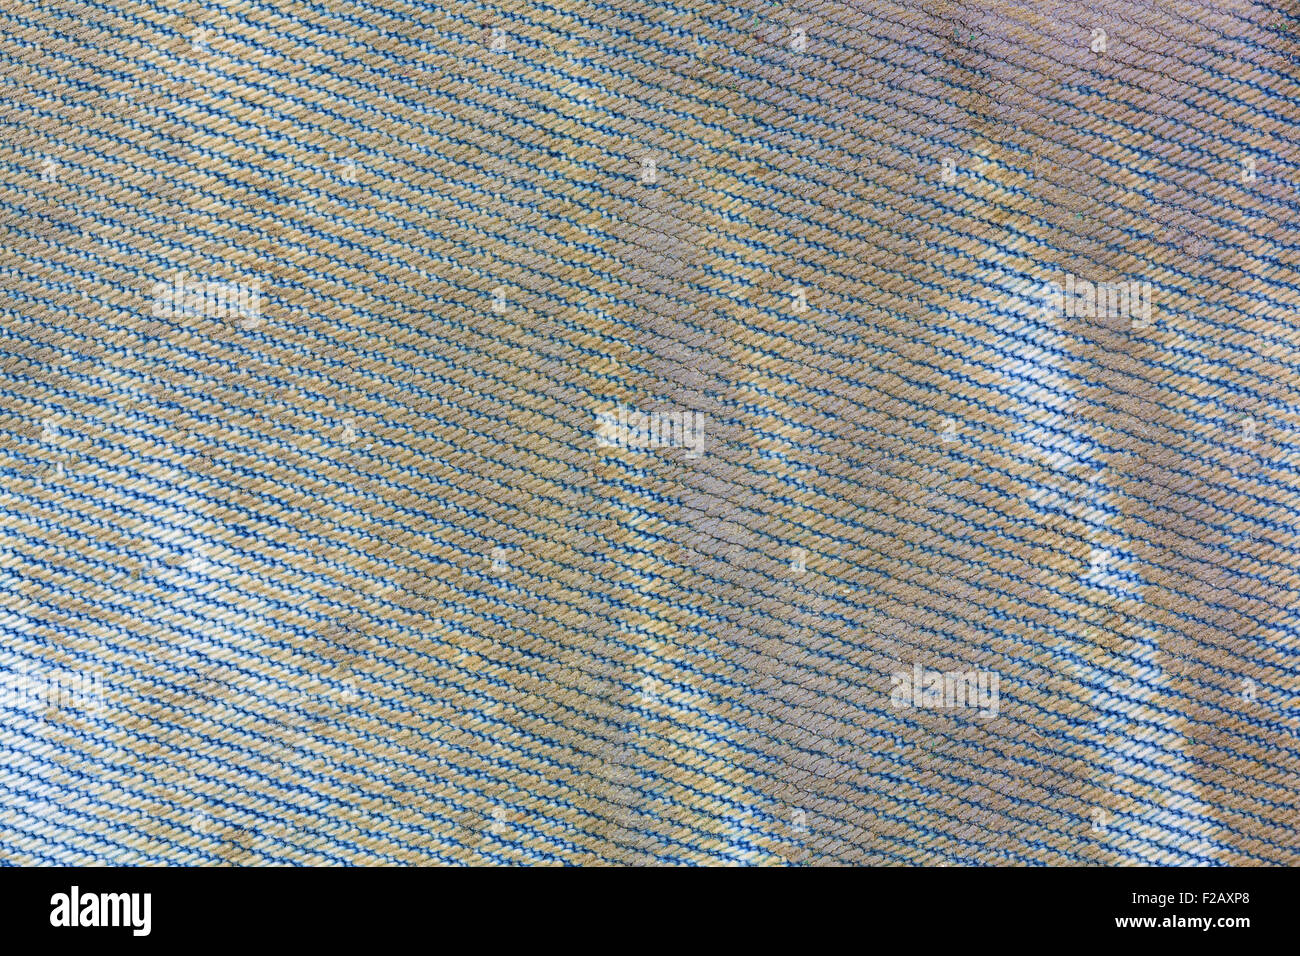 A very close view of muddy and dirty blue jeans. Stock Photo